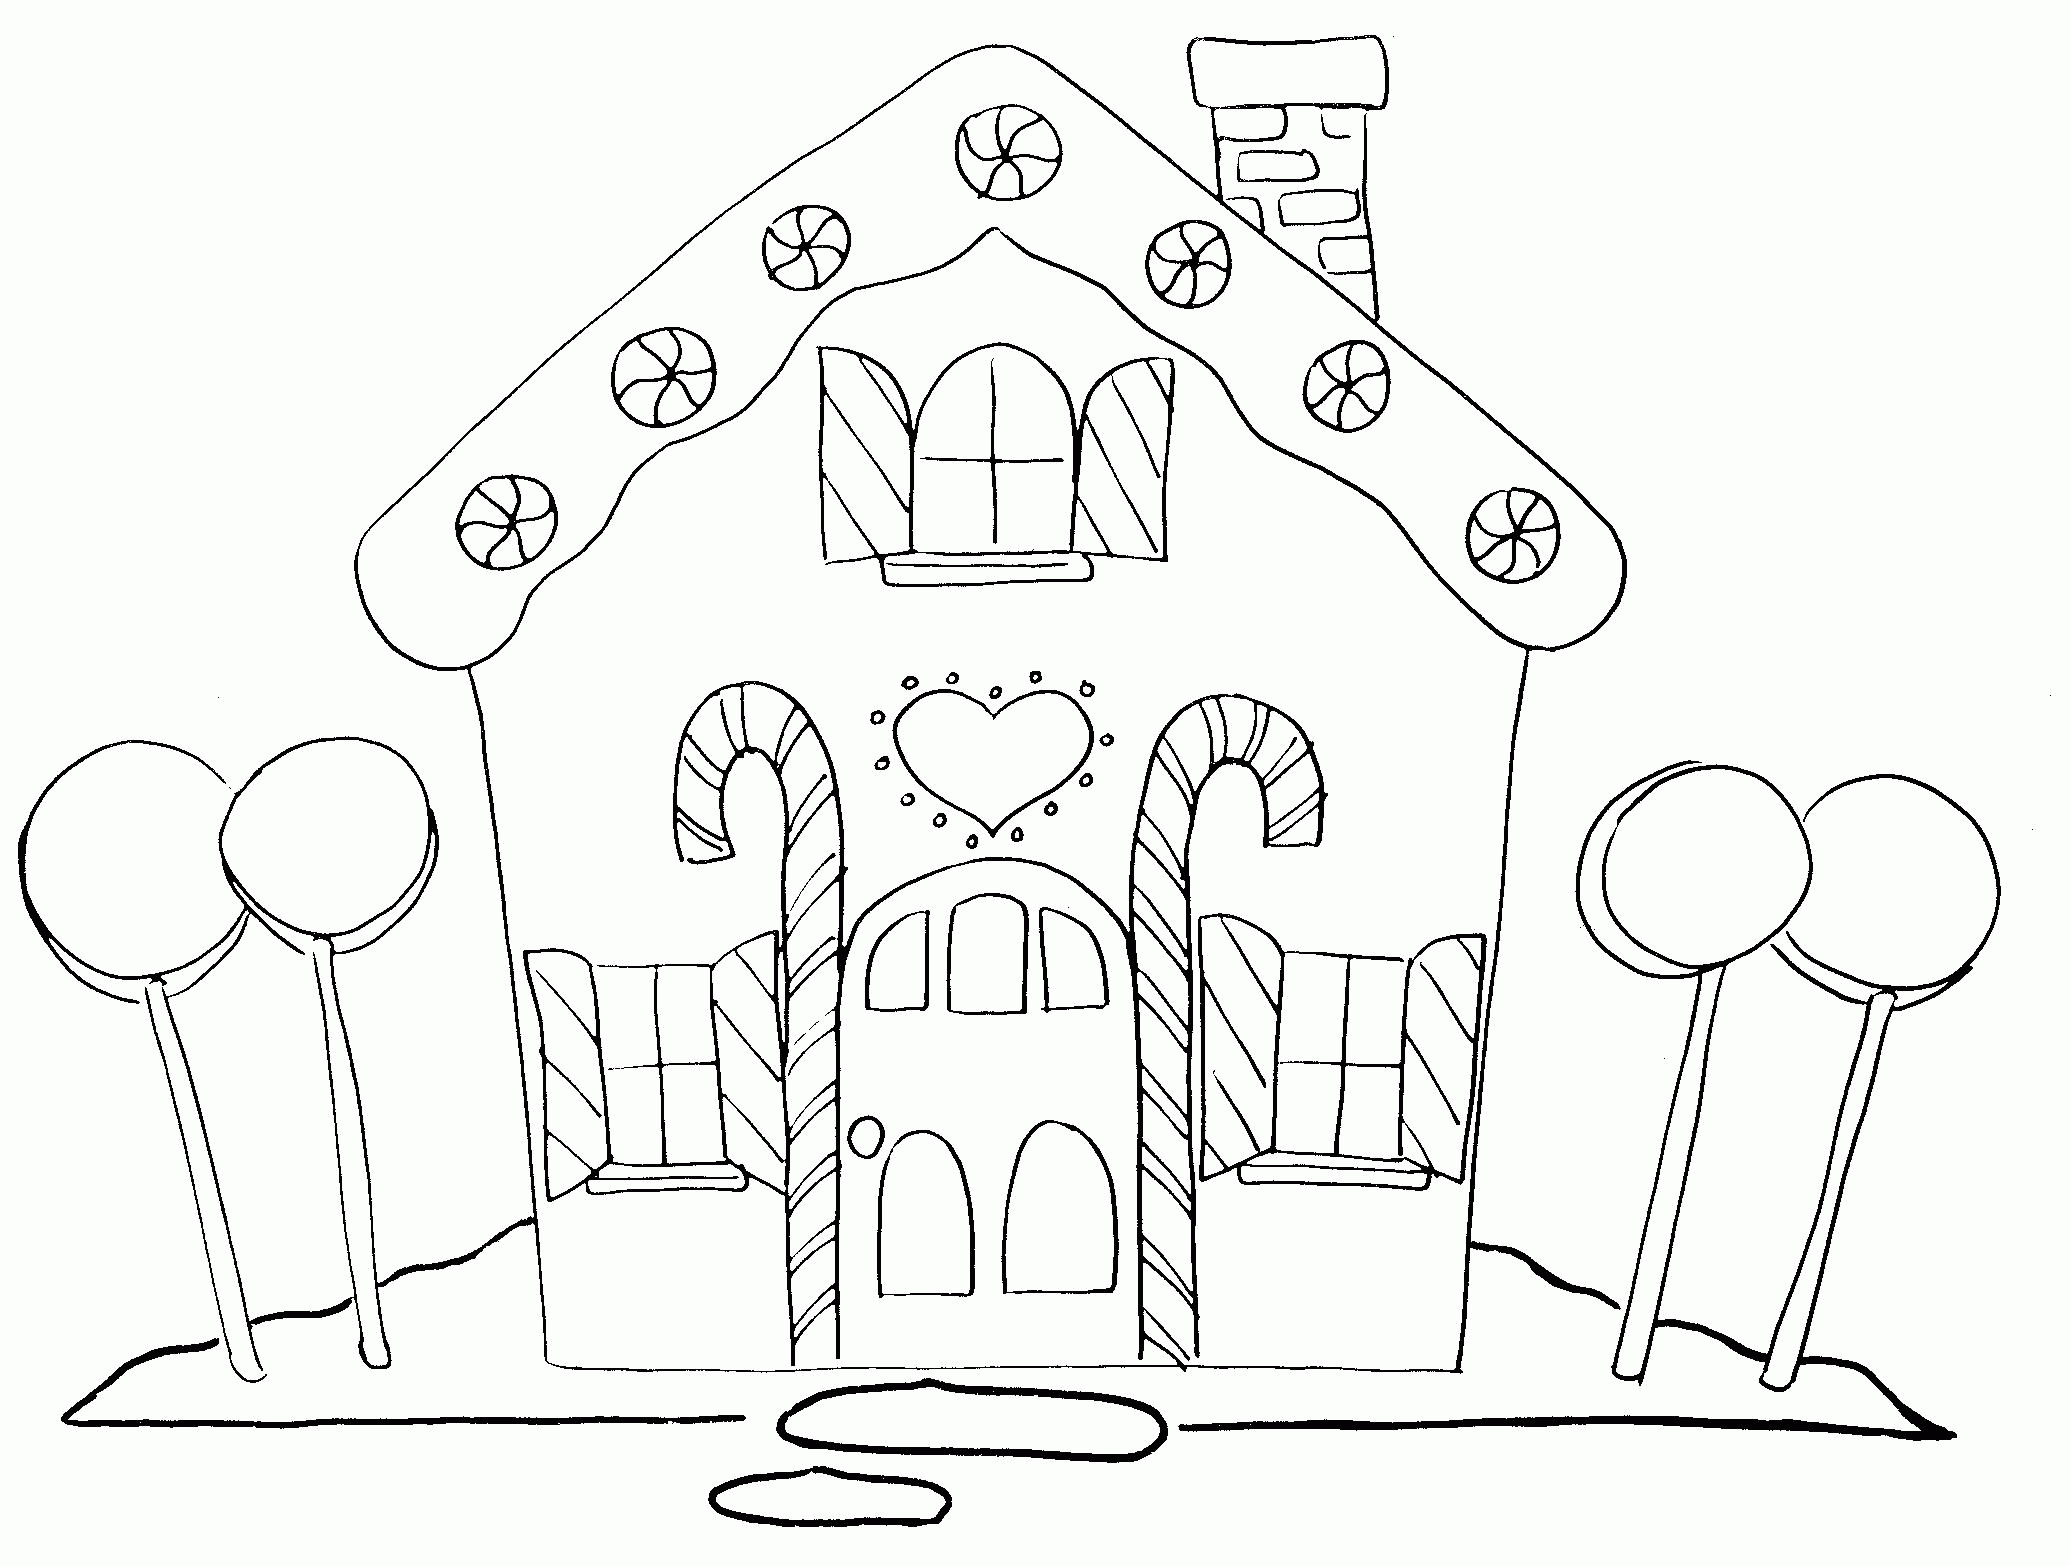 Gingerbread Coloring Page (17 Pictures) - Colorine.net | 19292